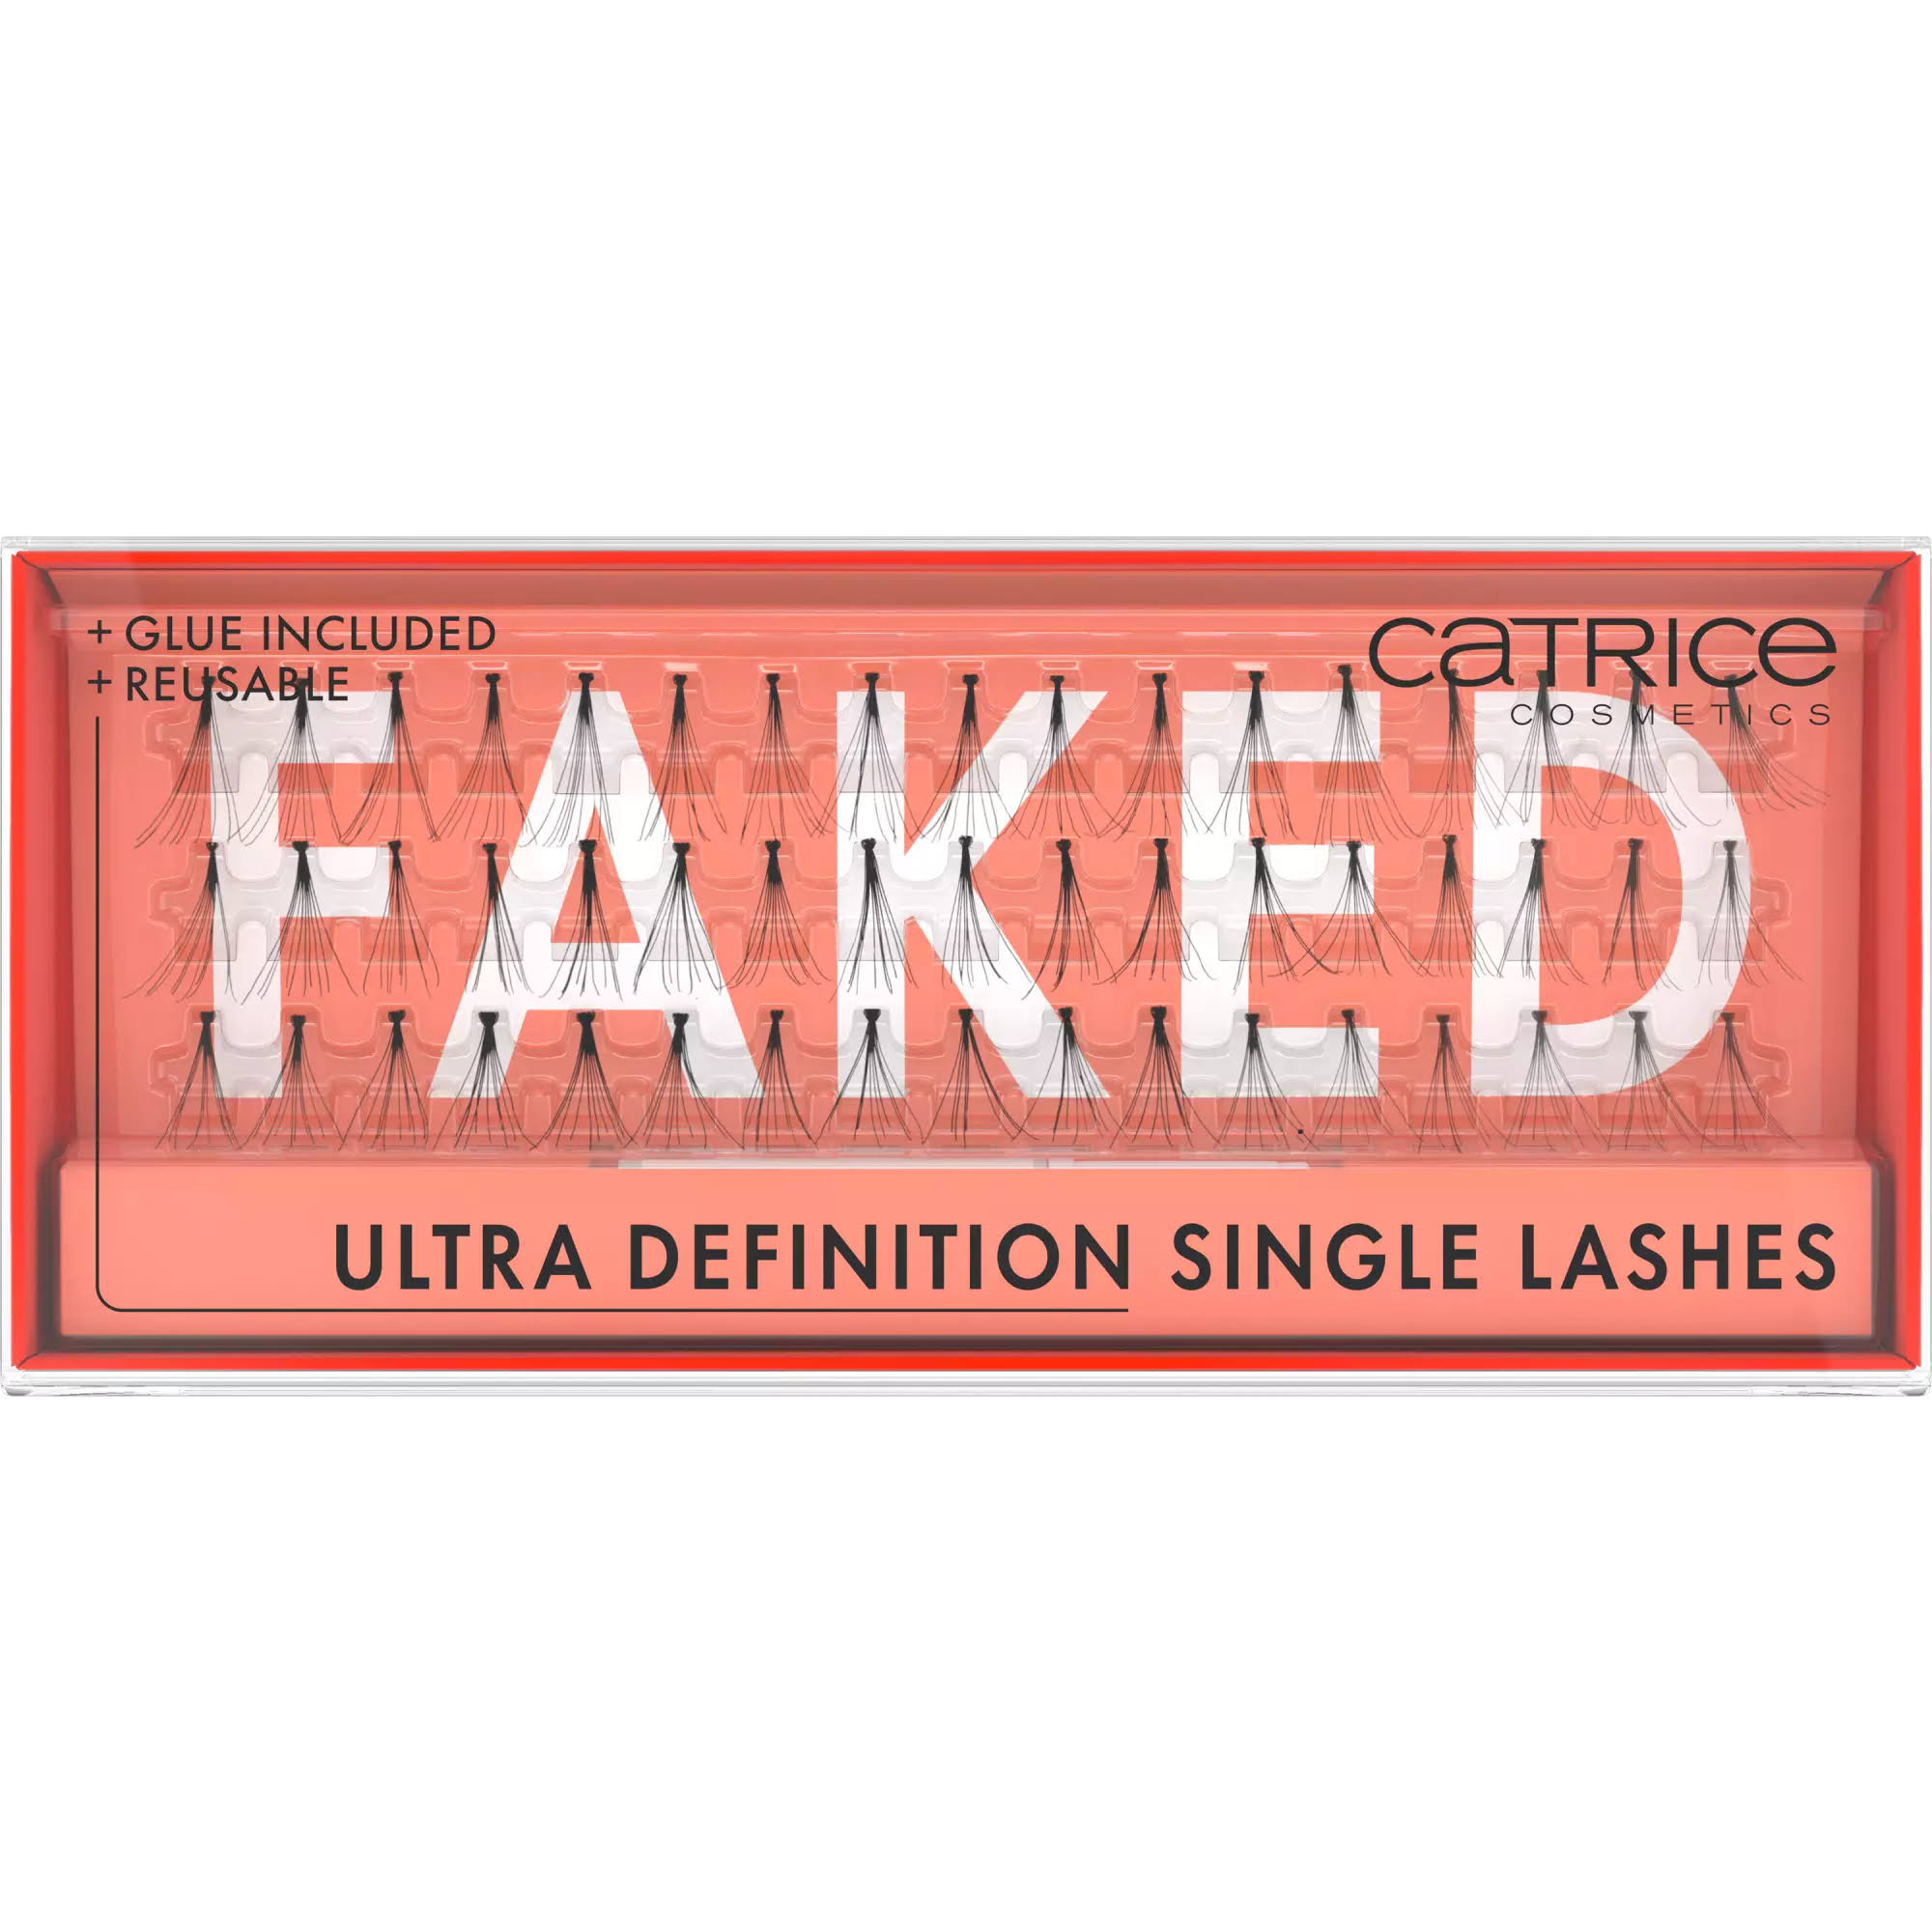 Catrice FAKED Ultra Definition Single Lashes